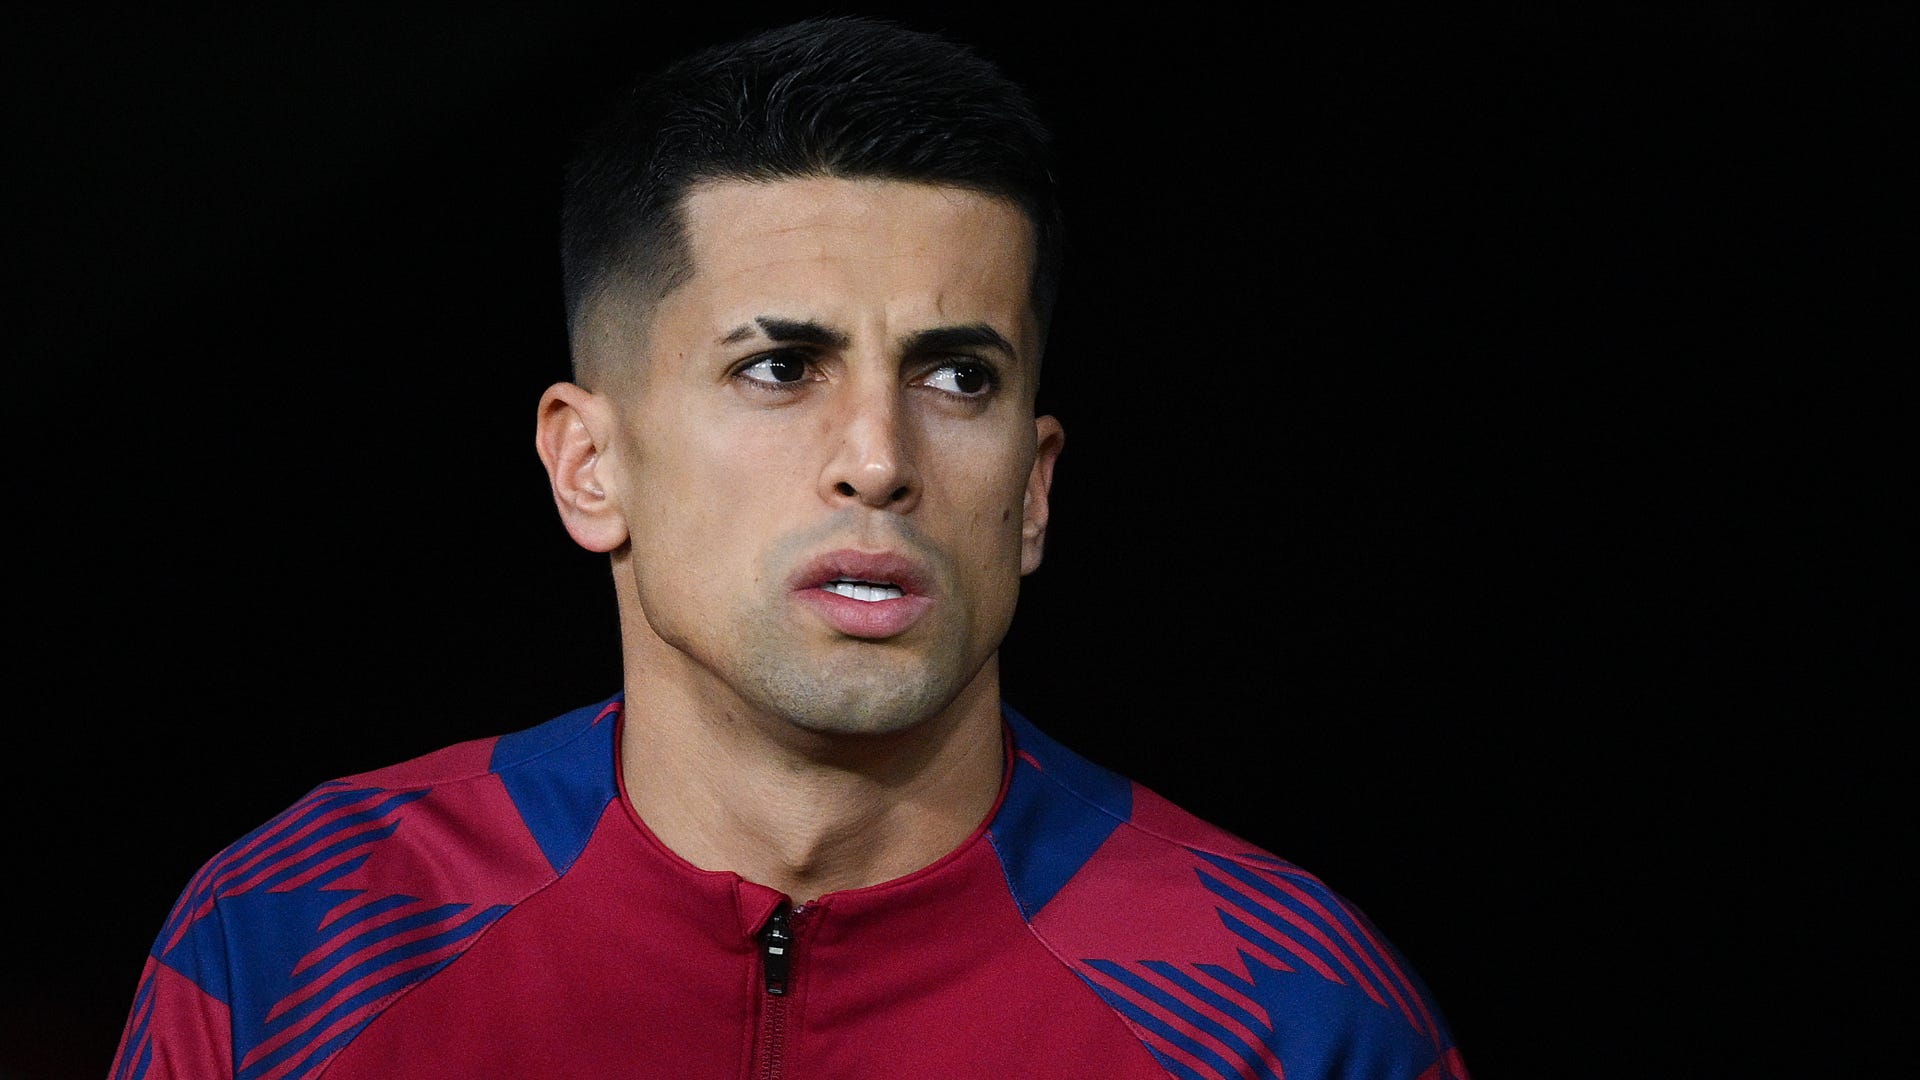 ‘Even God couldn’t stand him!’ - Joao Cancelo absolutely slammed for 'attitude and behaviour problem’ throughout career which led to Man City and Valencia exits